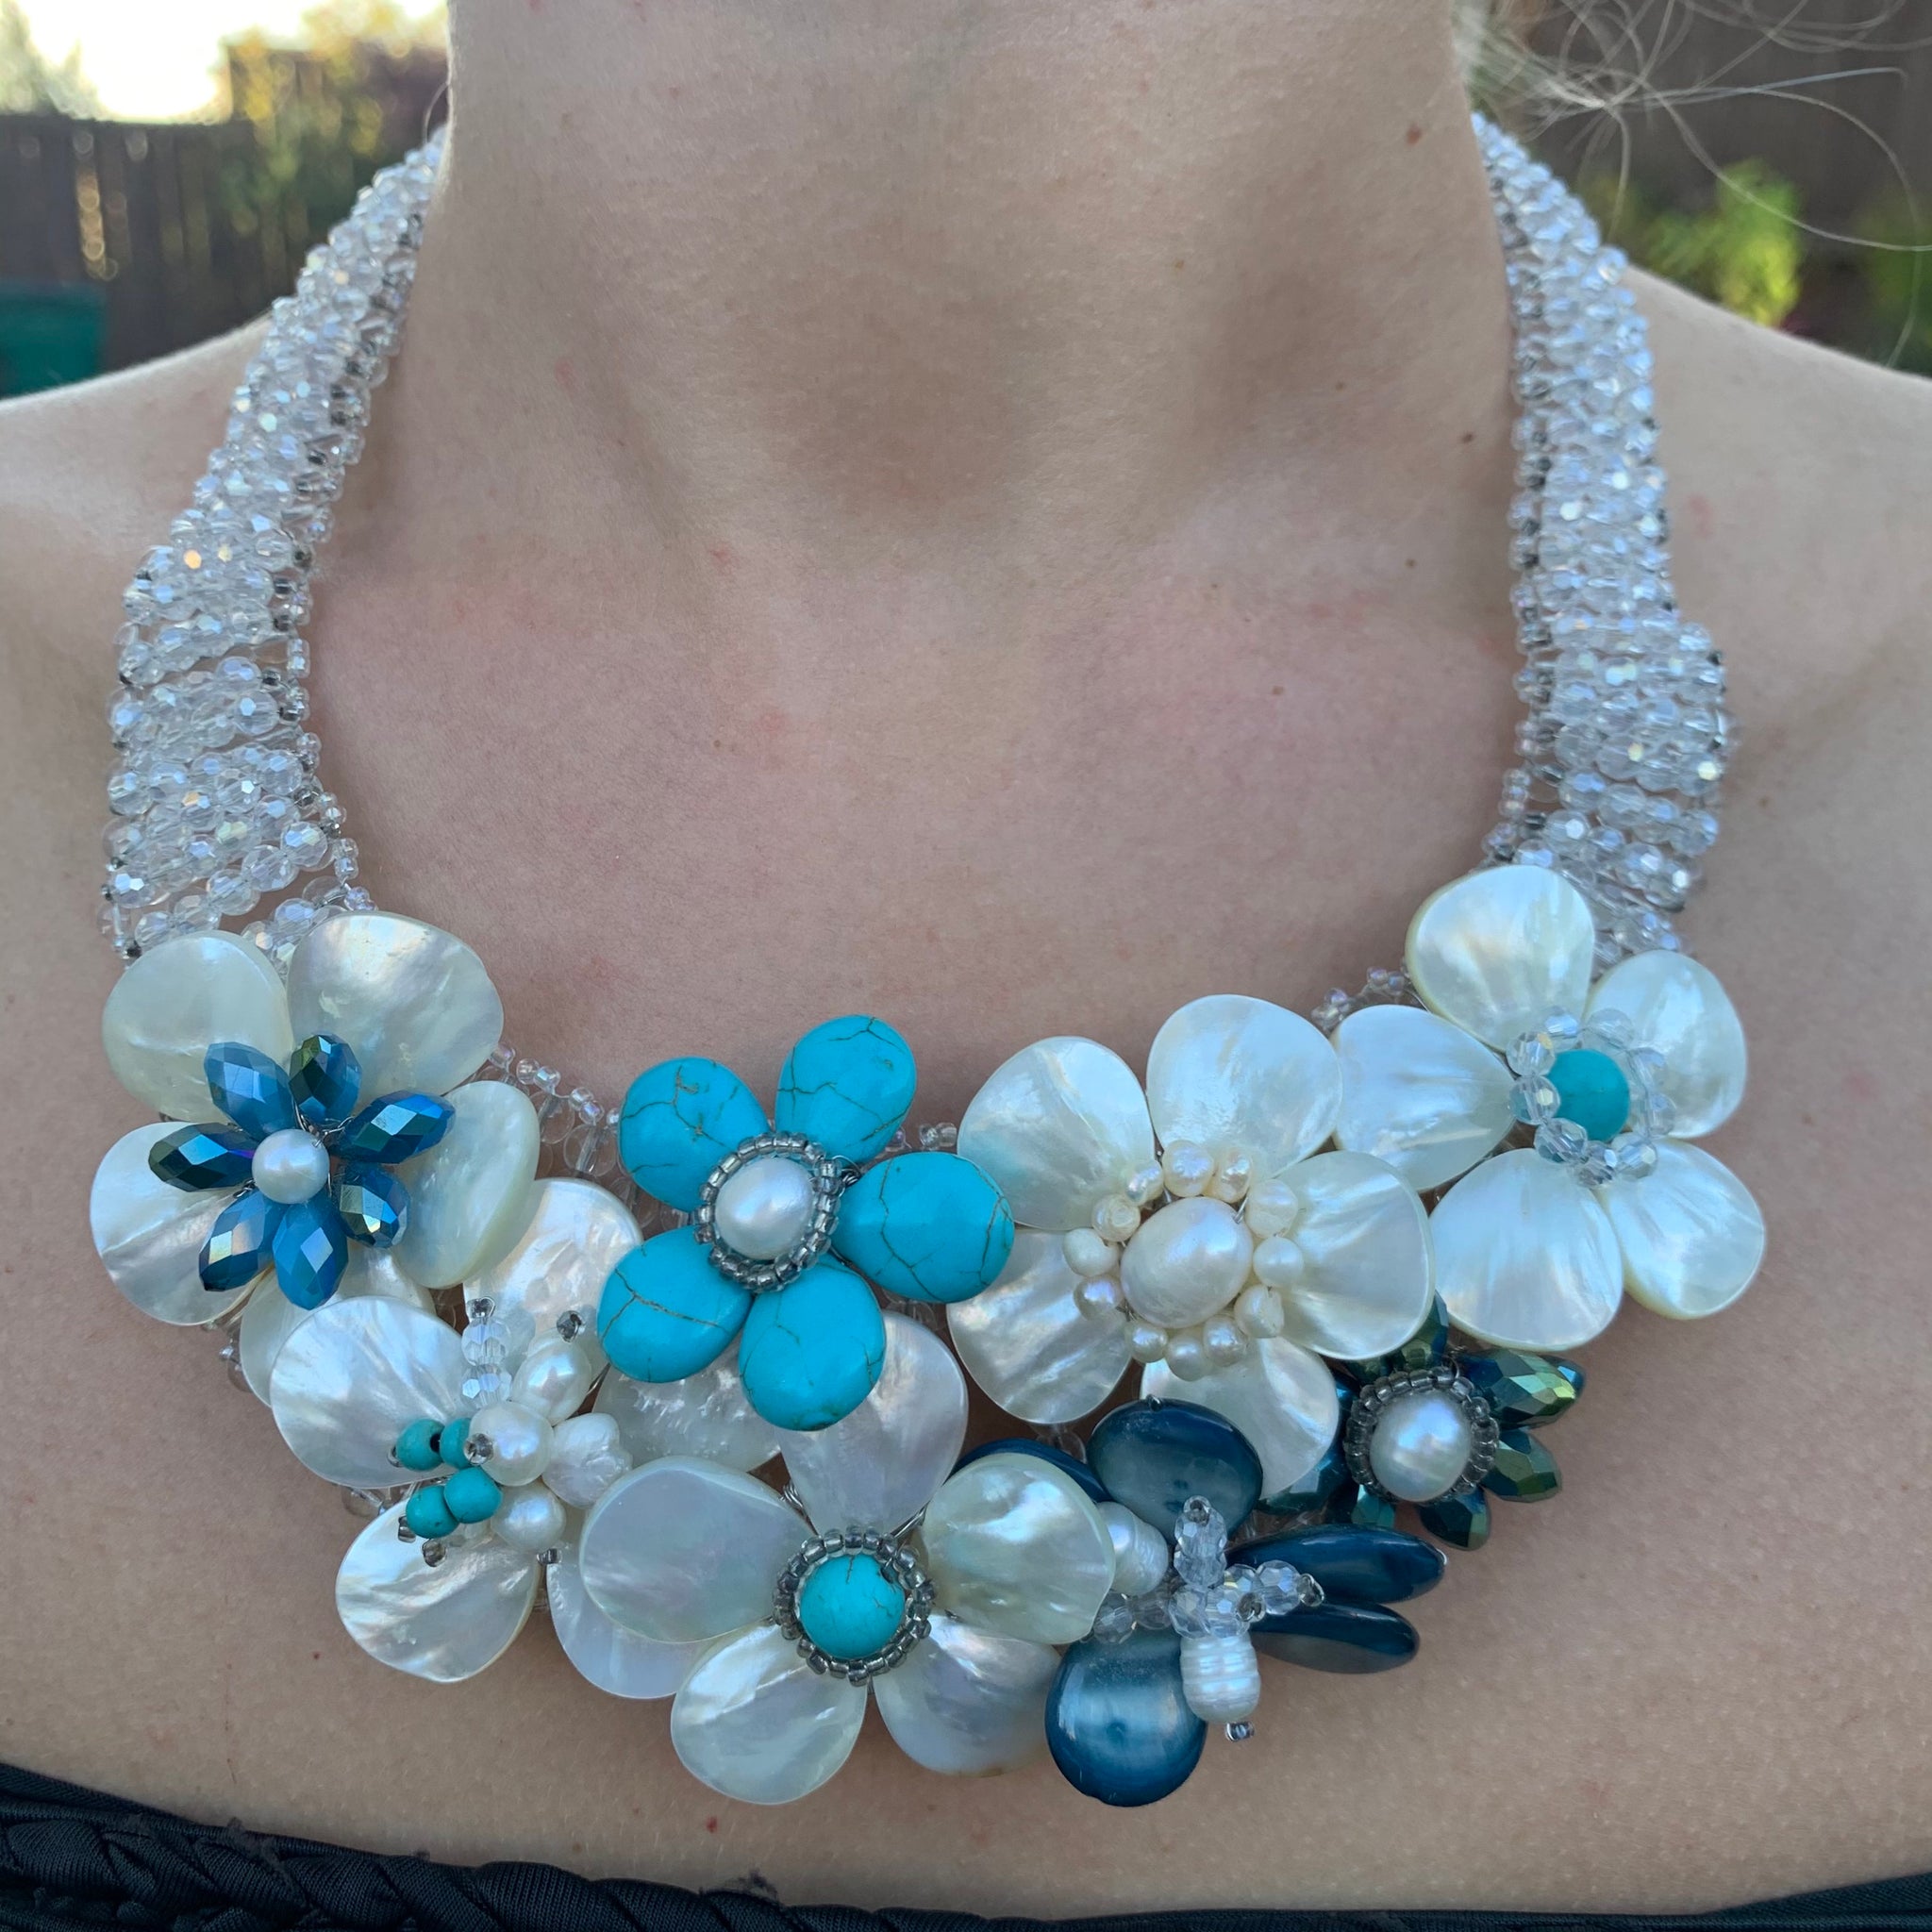 Handmade Choker 20" Turquoise and Pearls with Carved Sea Shells Floral Necklace